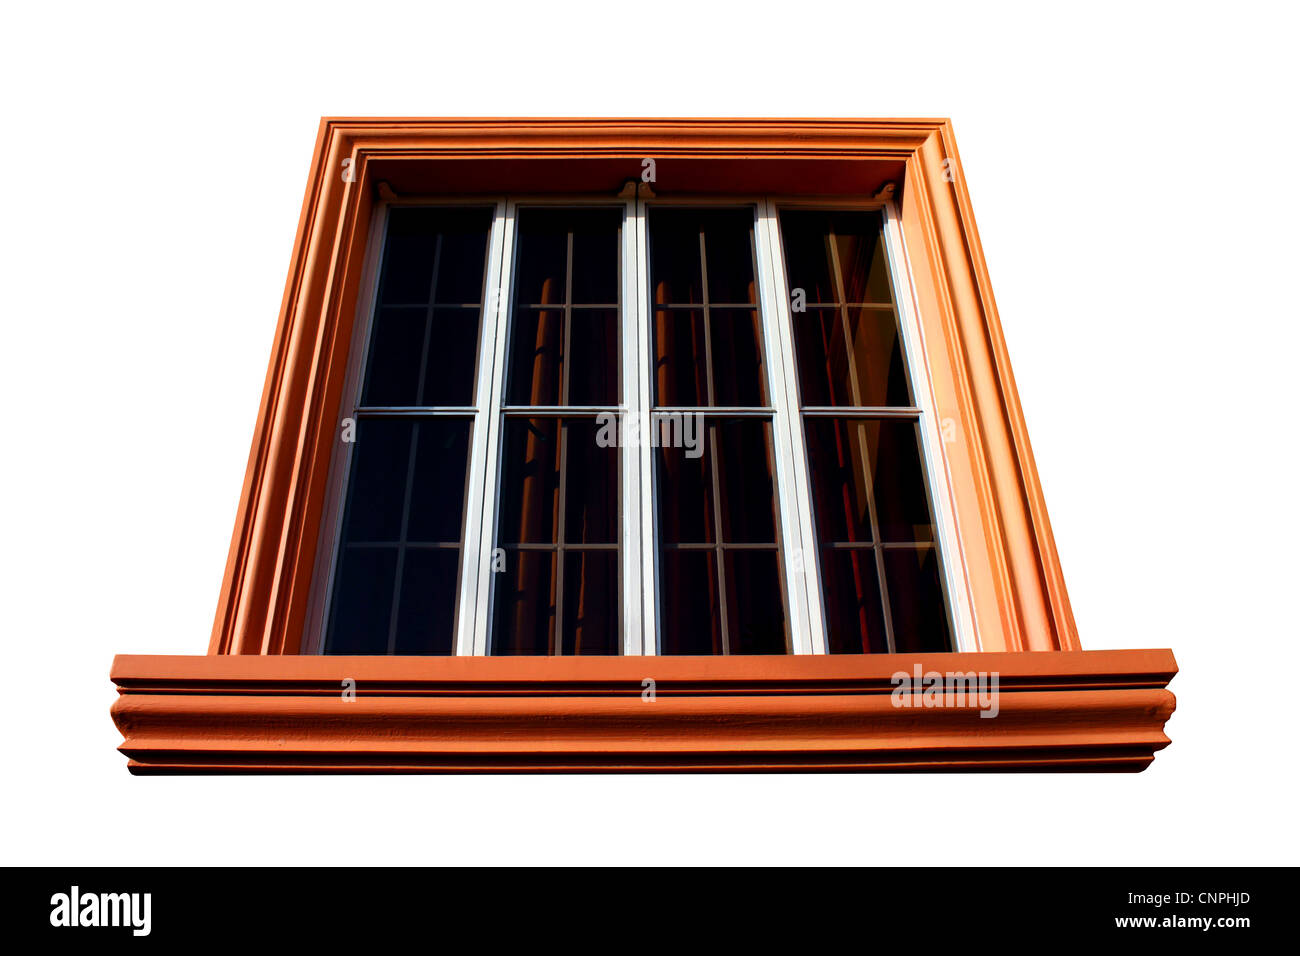 Modern architectural window design isolated in pure white background Stock Photo